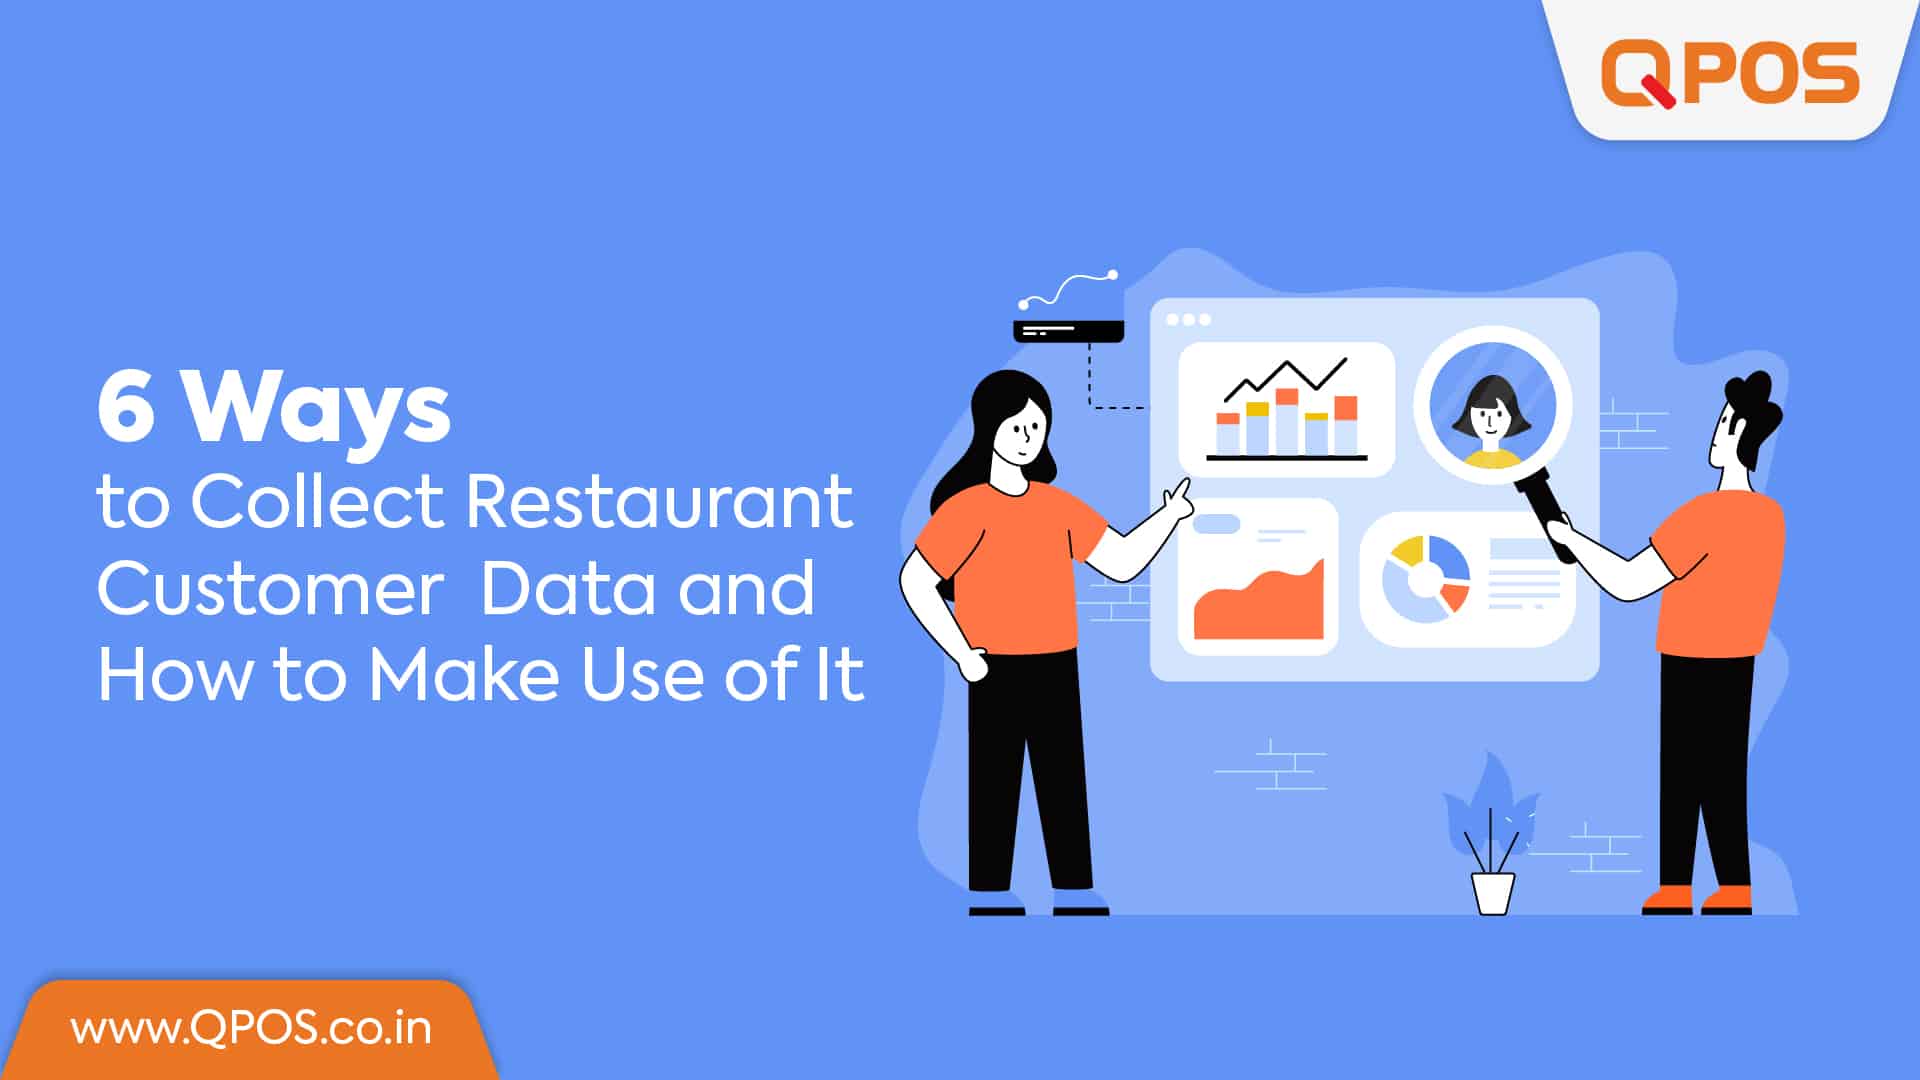 6 Ways to Collect Restaurant Customer Data and How to Make Use of It